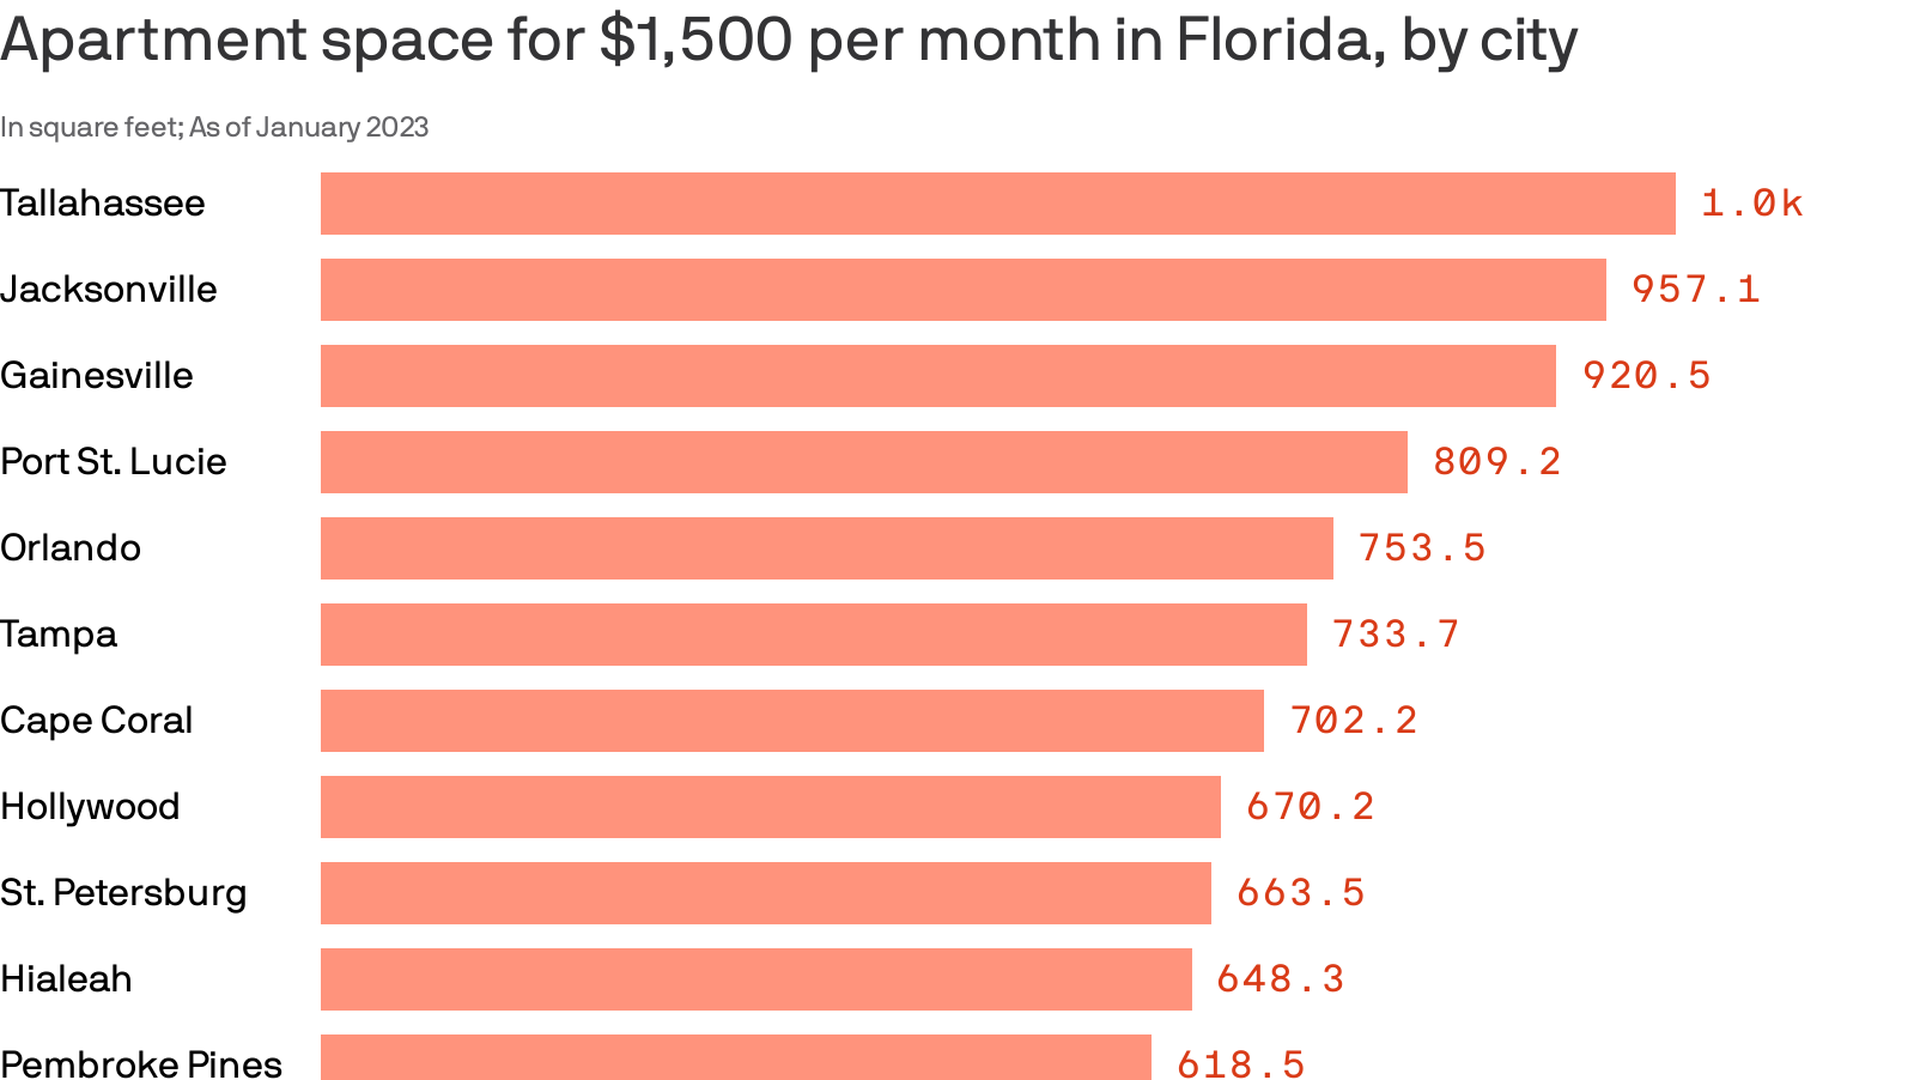 graph shows that in Tallahassee, renters get 1,000 square feet for $1500 